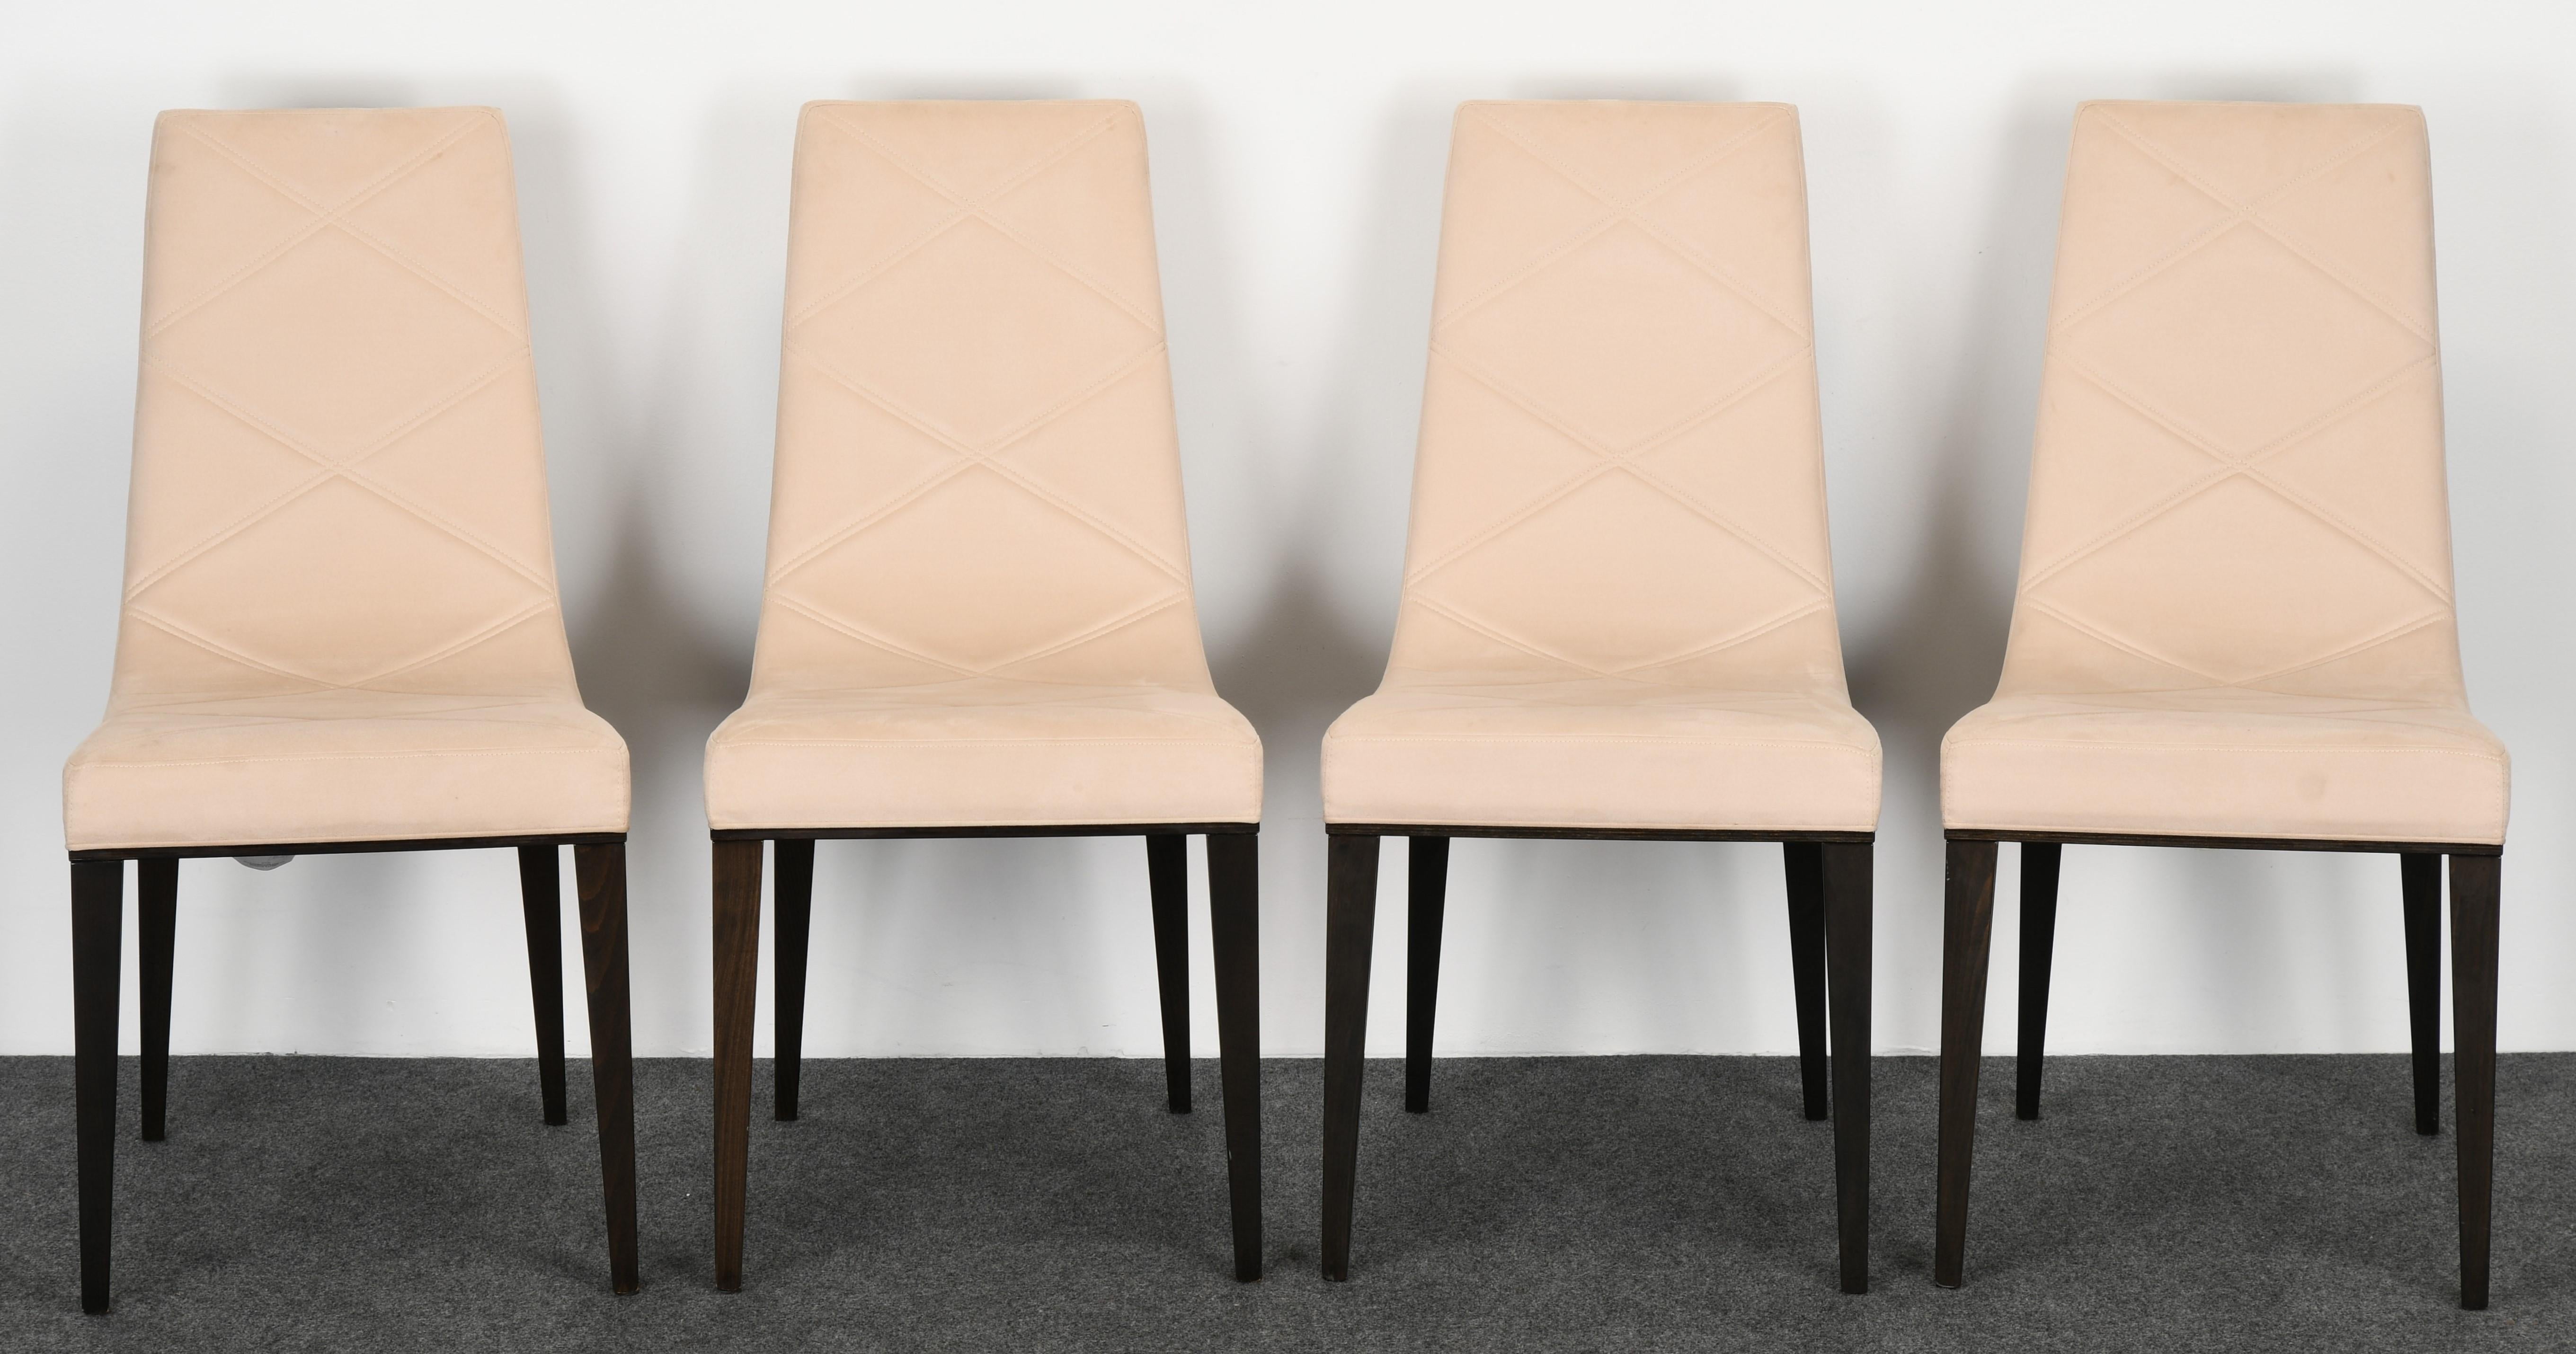 A very sleek Modern set of six Art Deco style dining chairs by Pietro Costantini, 1980s. The chairs are upholstered in quilted ultra-suede fabric with chocolate ebonized finish. This set includes two armchairs and four side chairs. The chairs are in